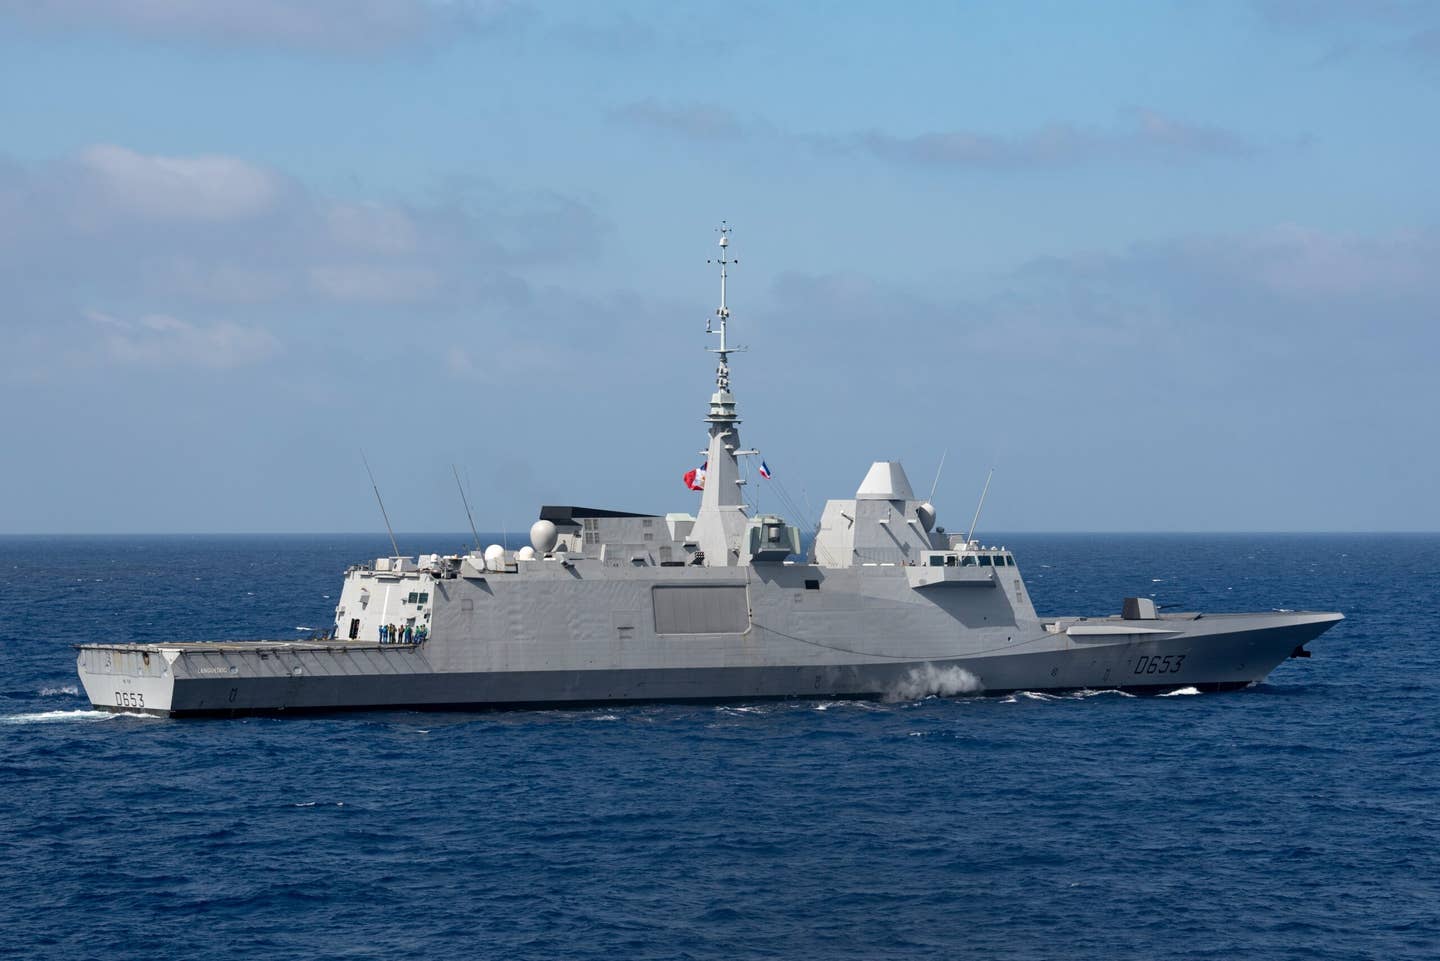 The FREMM Languedoc, patrolling off the coast of Yemen, is France's contribution to Operation Prosperity Guardian. (French Navy photo)